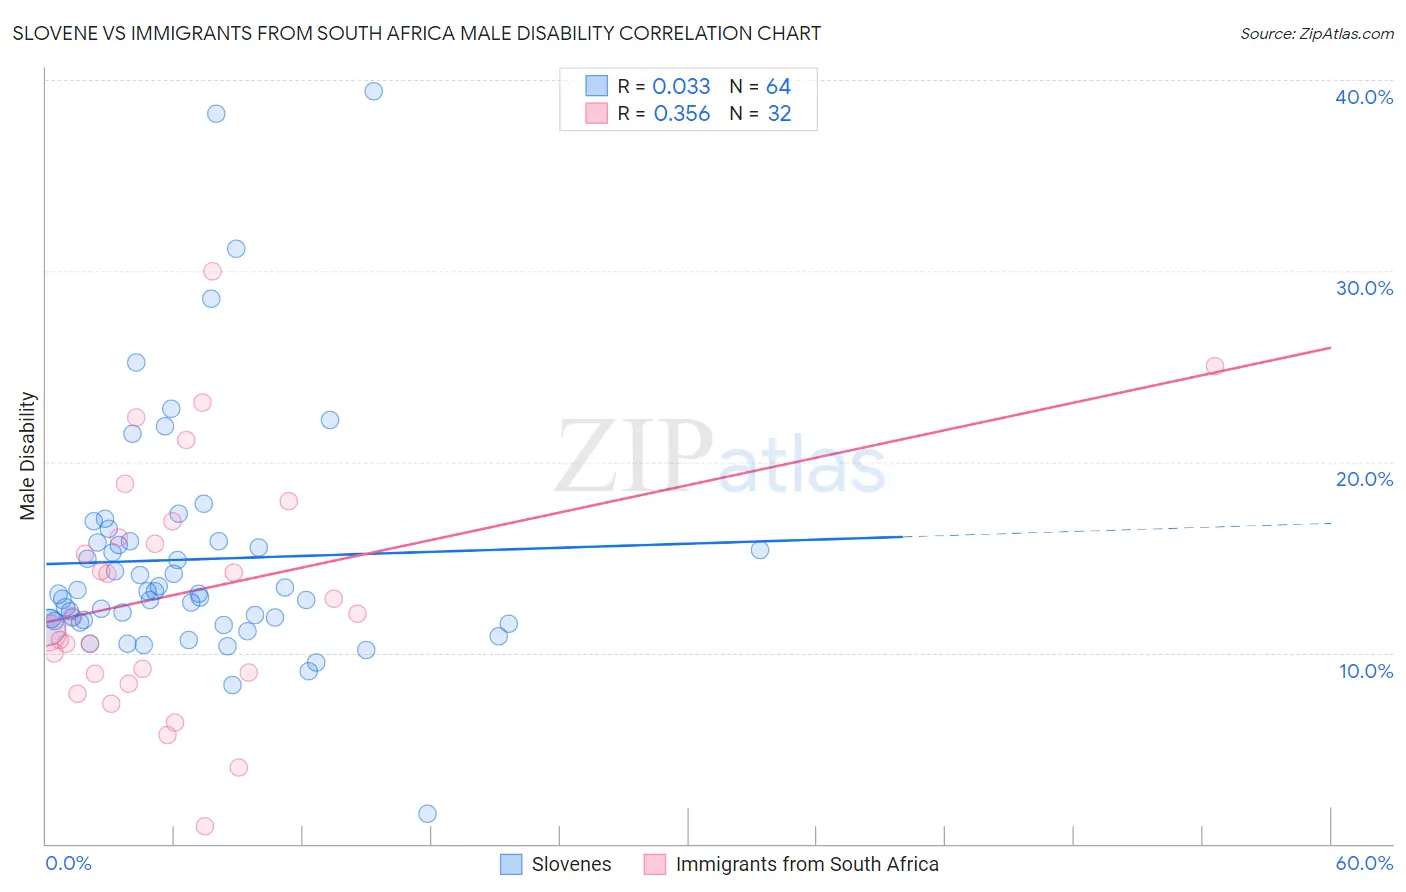 Slovene vs Immigrants from South Africa Male Disability